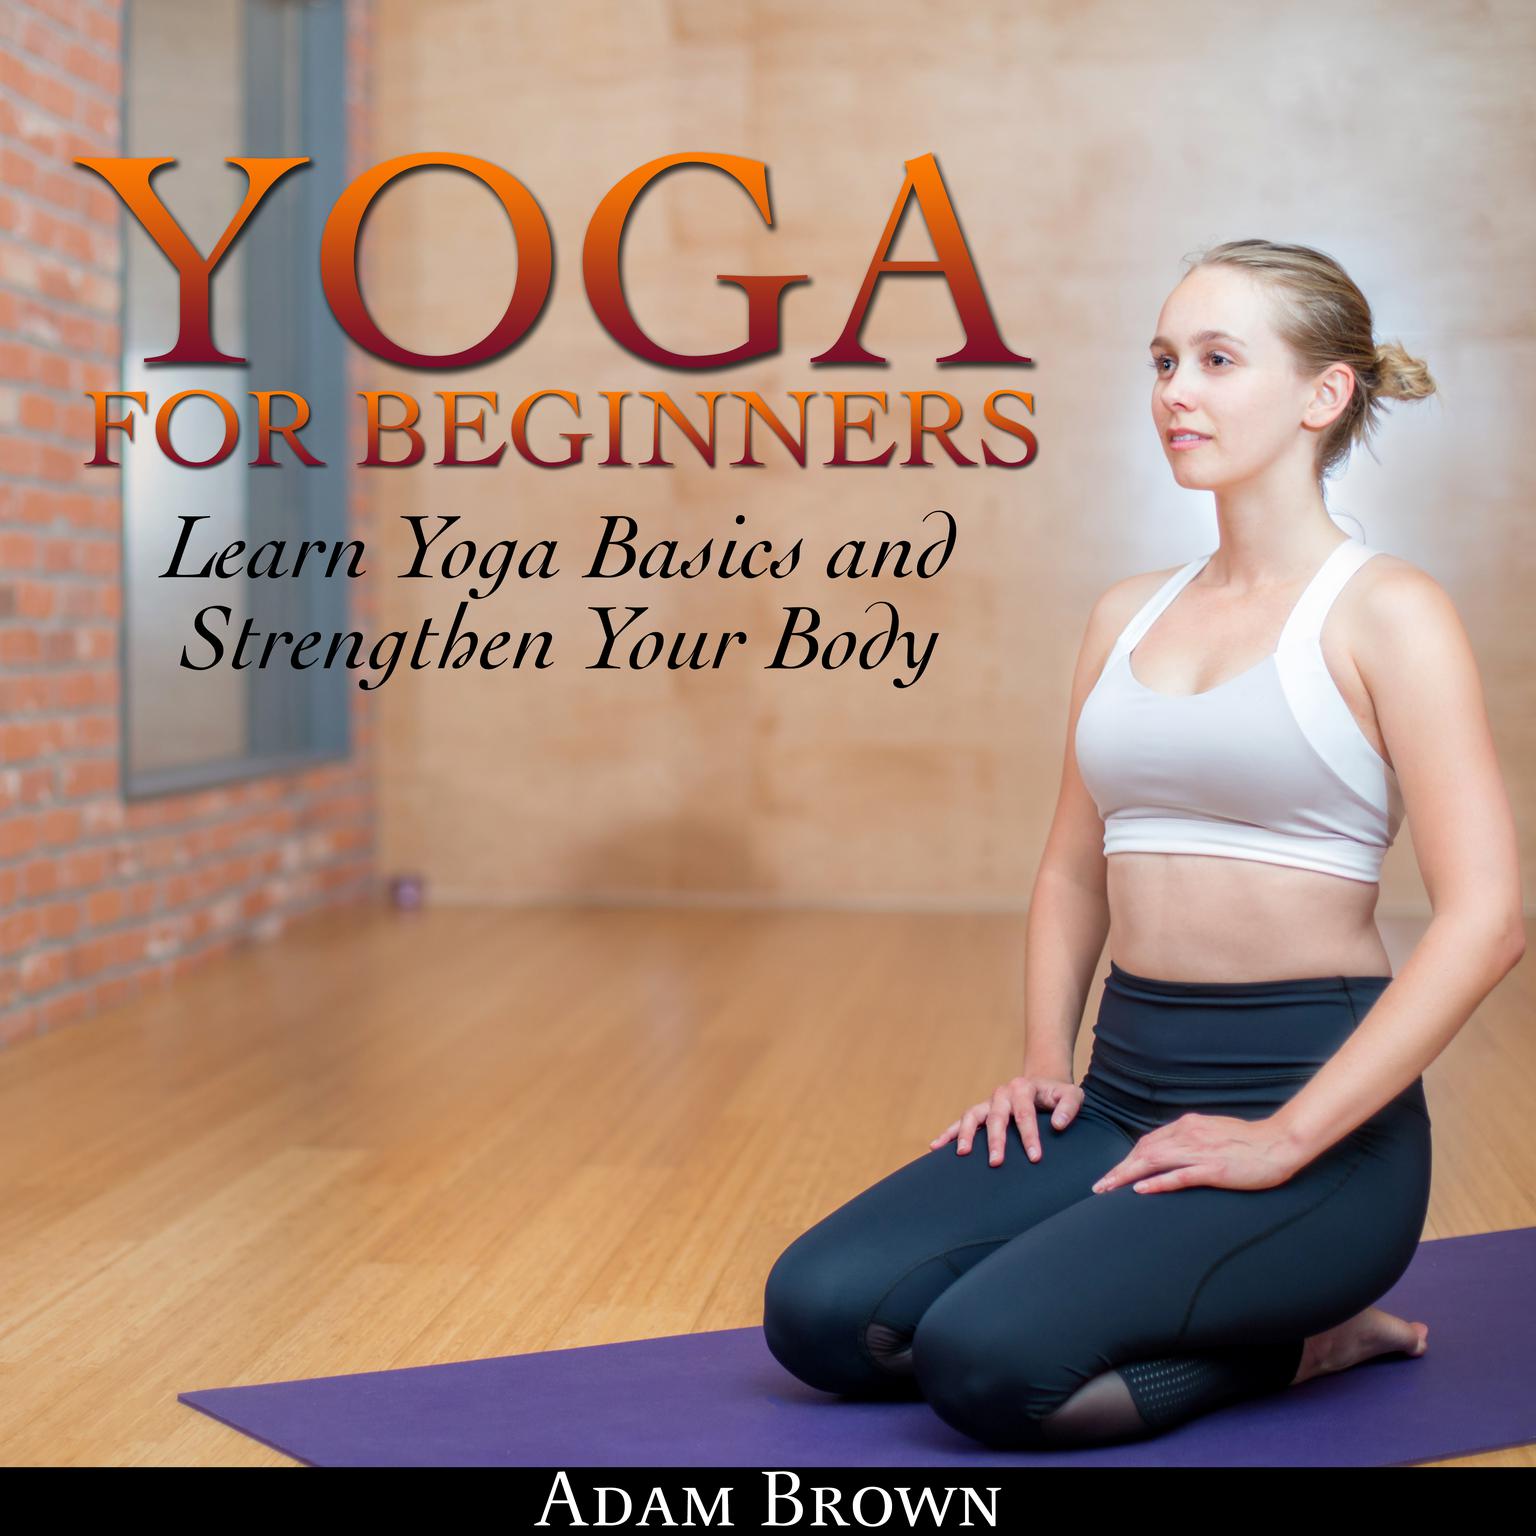 Yoga for Beginners: Learn Yoga Basics and Strengthen Your Body Audiobook, by Adam Brown